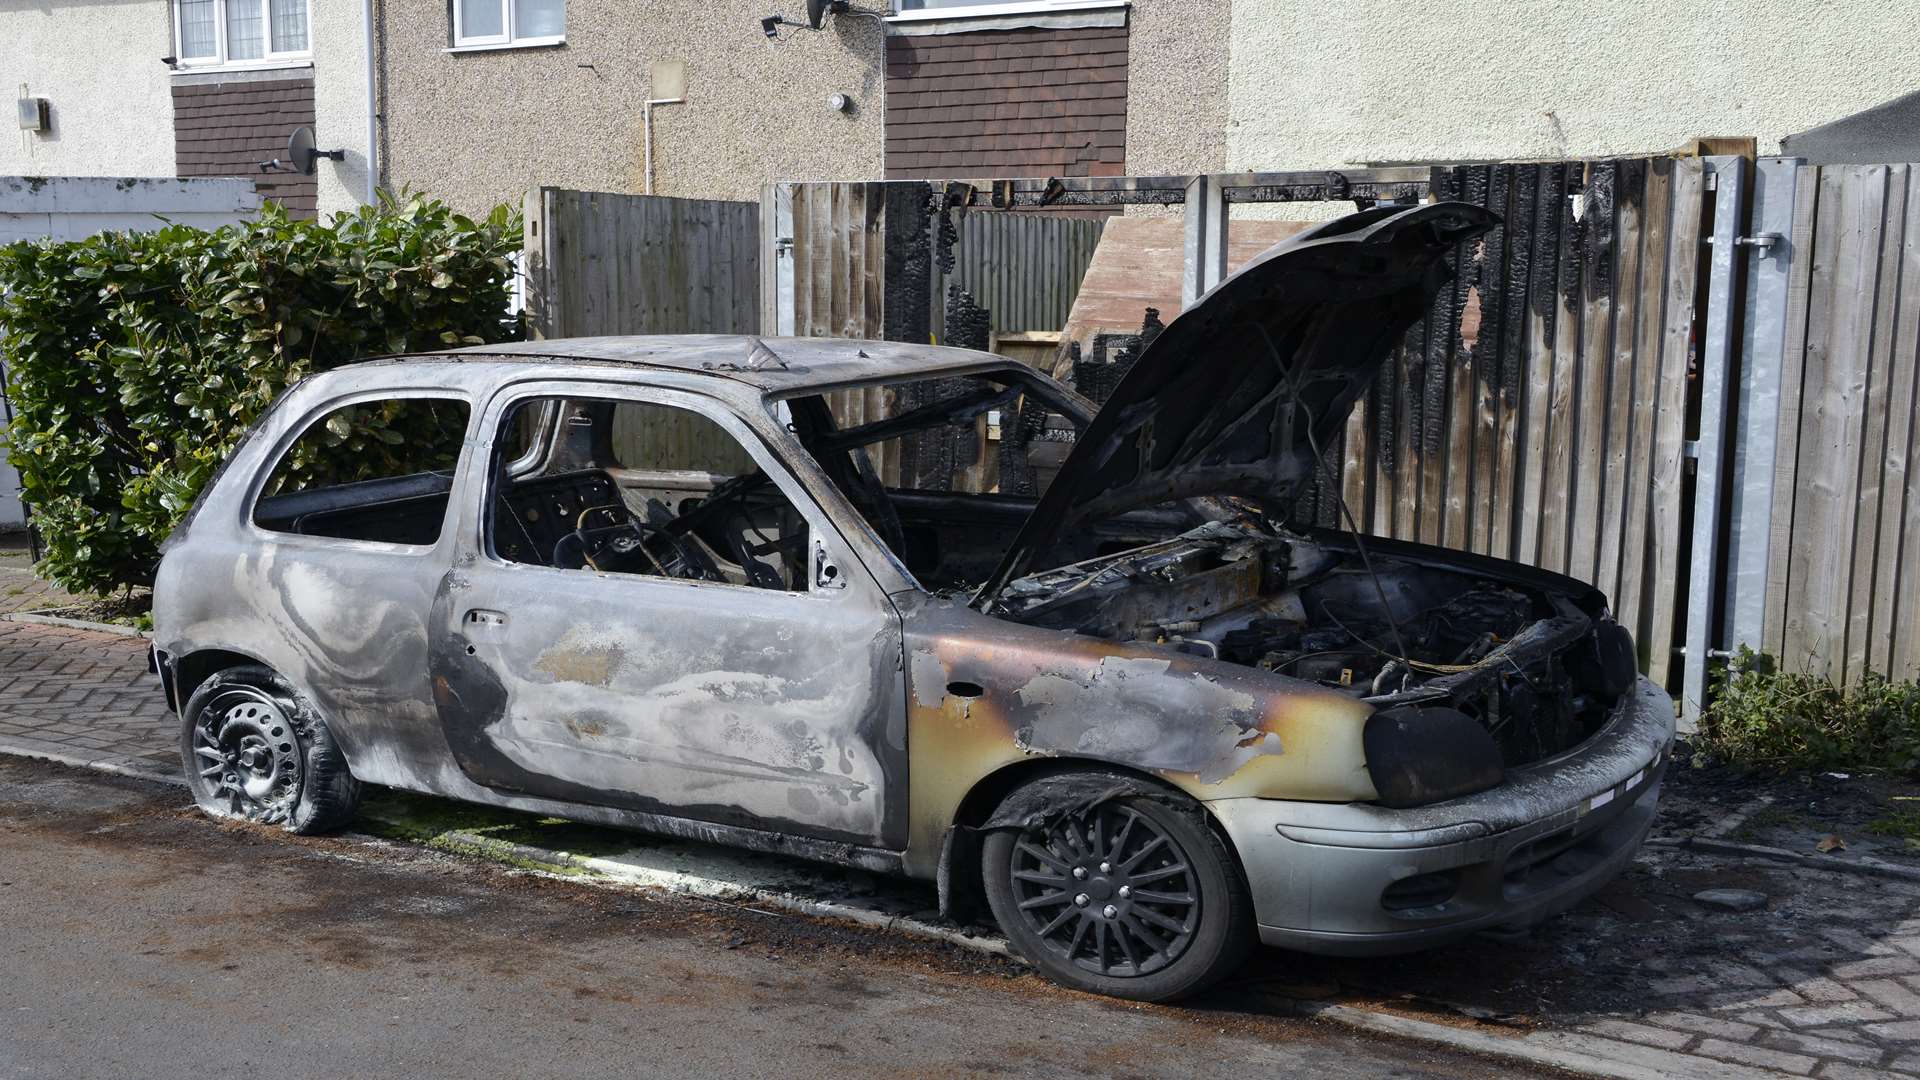 The fire ruined the car and spread to the fence